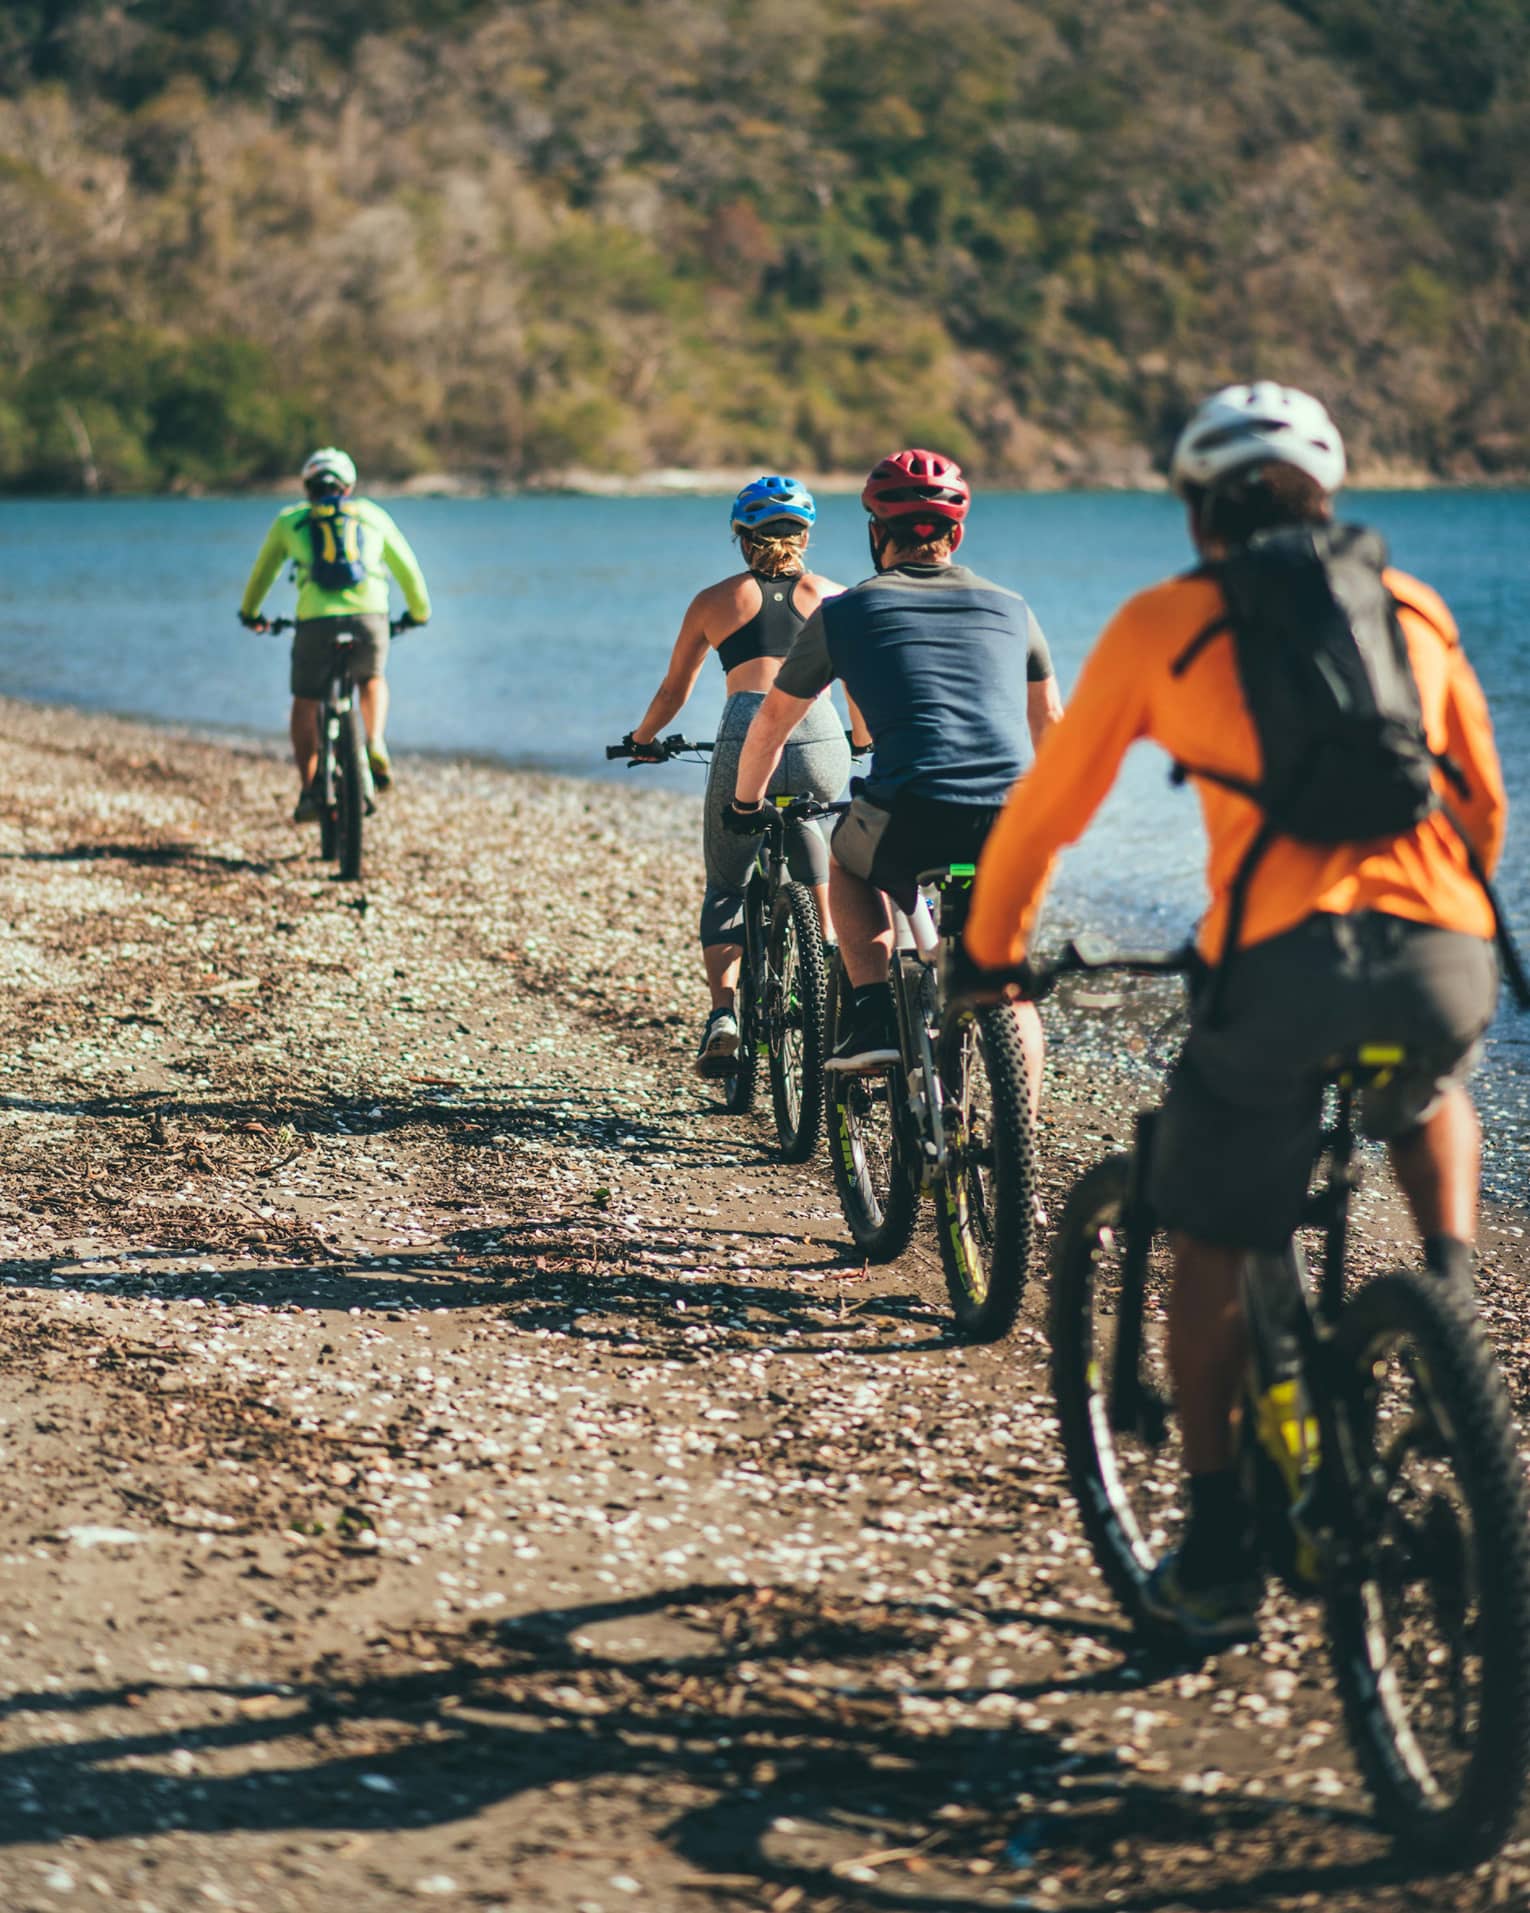 Four people riding bicycles through a rocky terrain next to the ocean